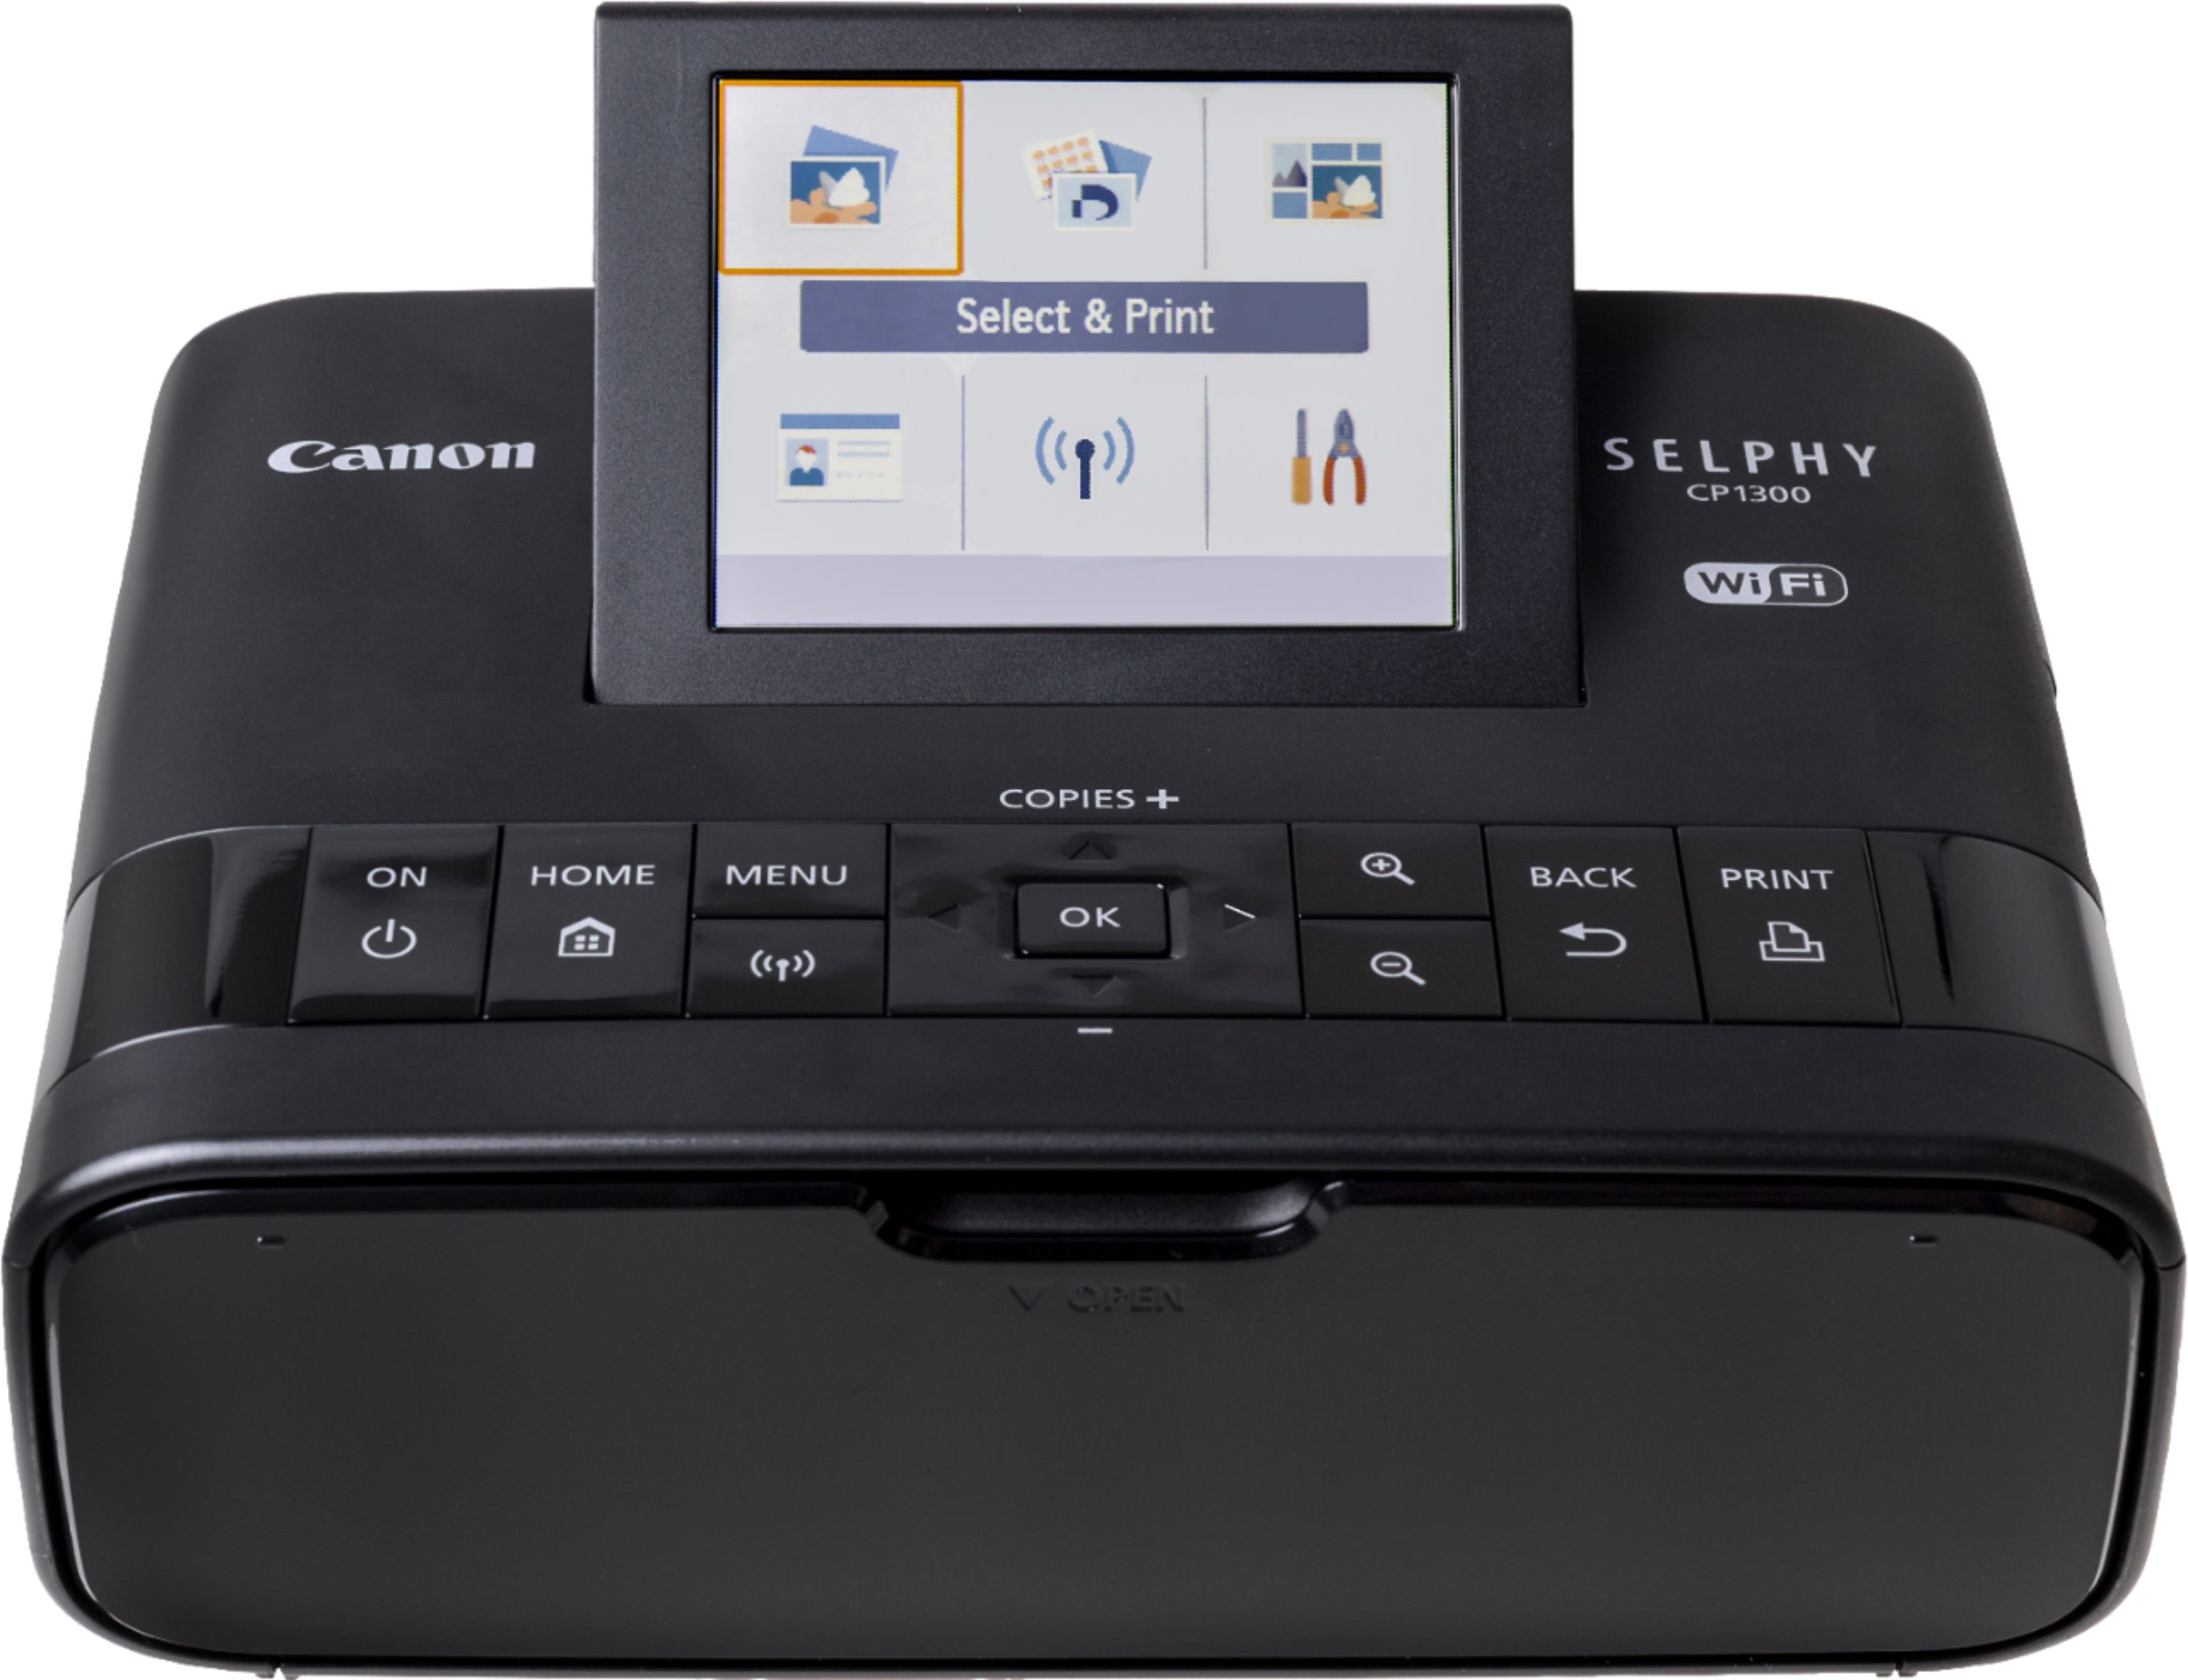 Canon SELPHY CP1300 Review